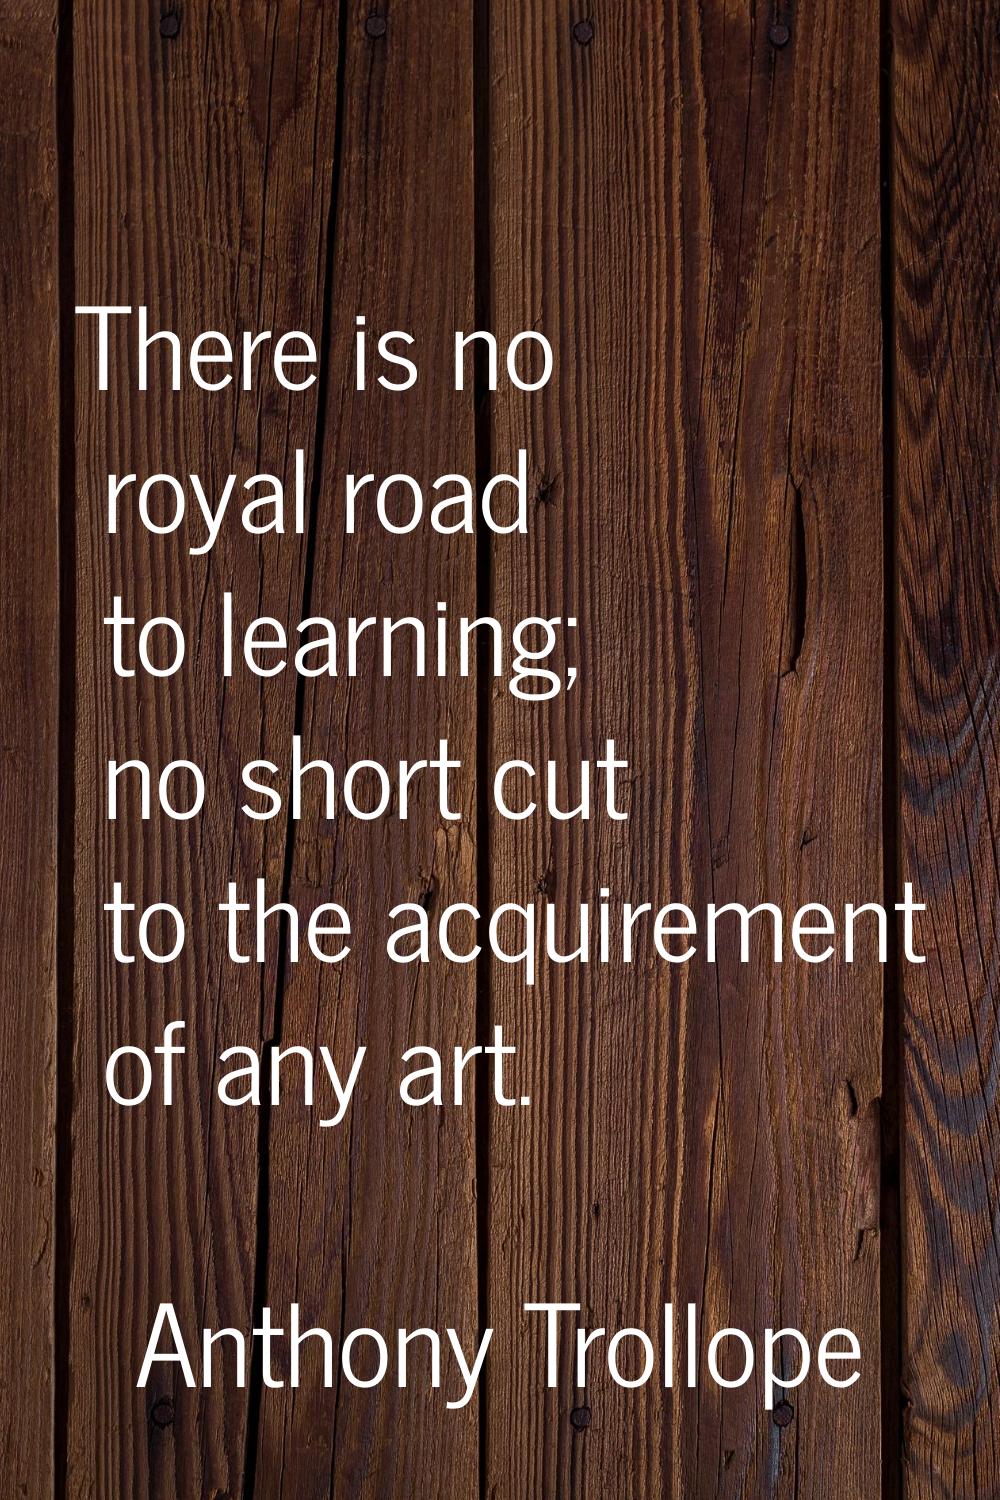 There is no royal road to learning; no short cut to the acquirement of any art.